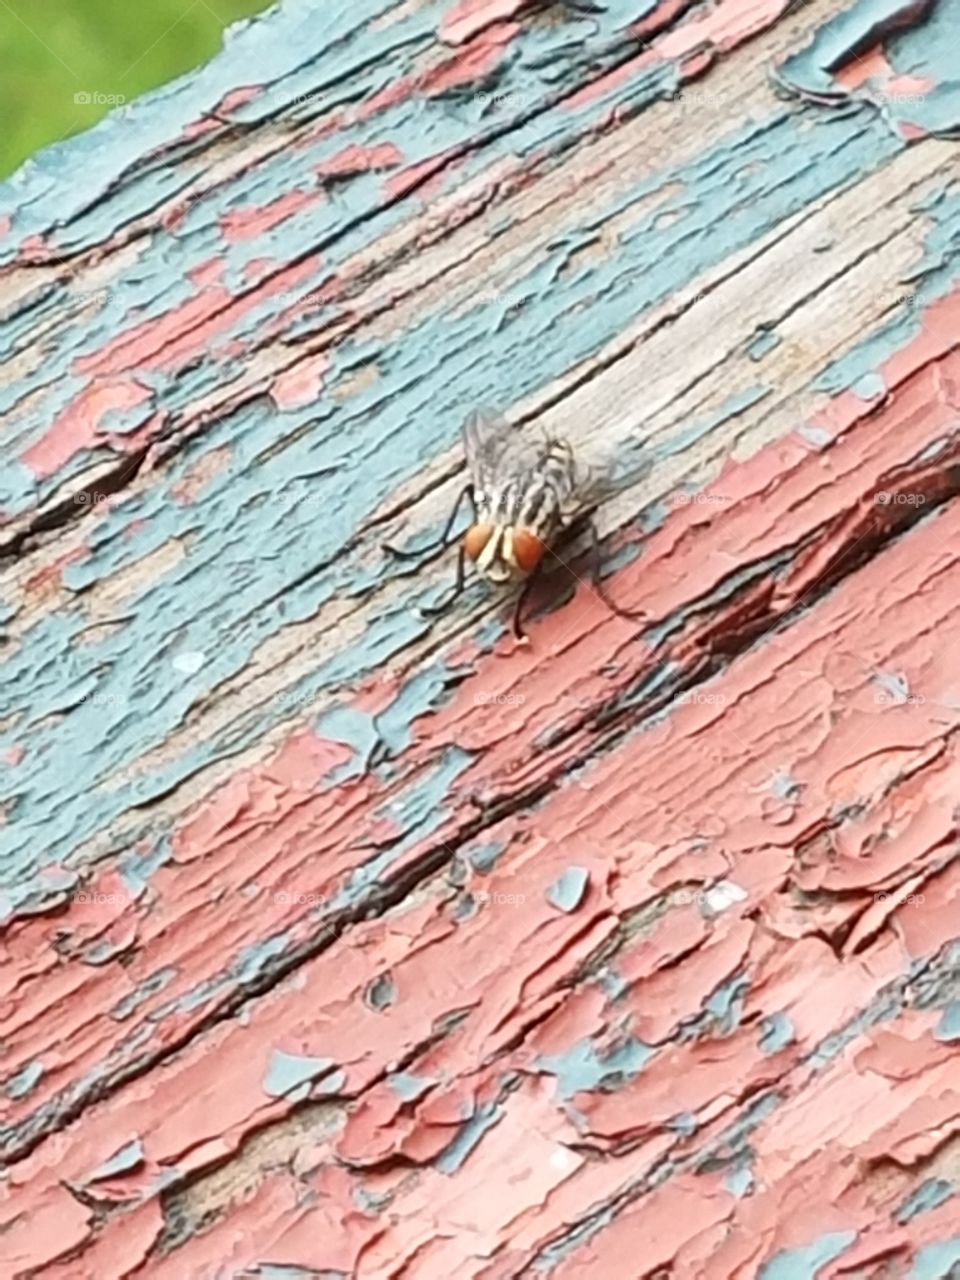 A horsefly resting on some old wood outdoors. #God'sArt #GloryToTheMostHigh